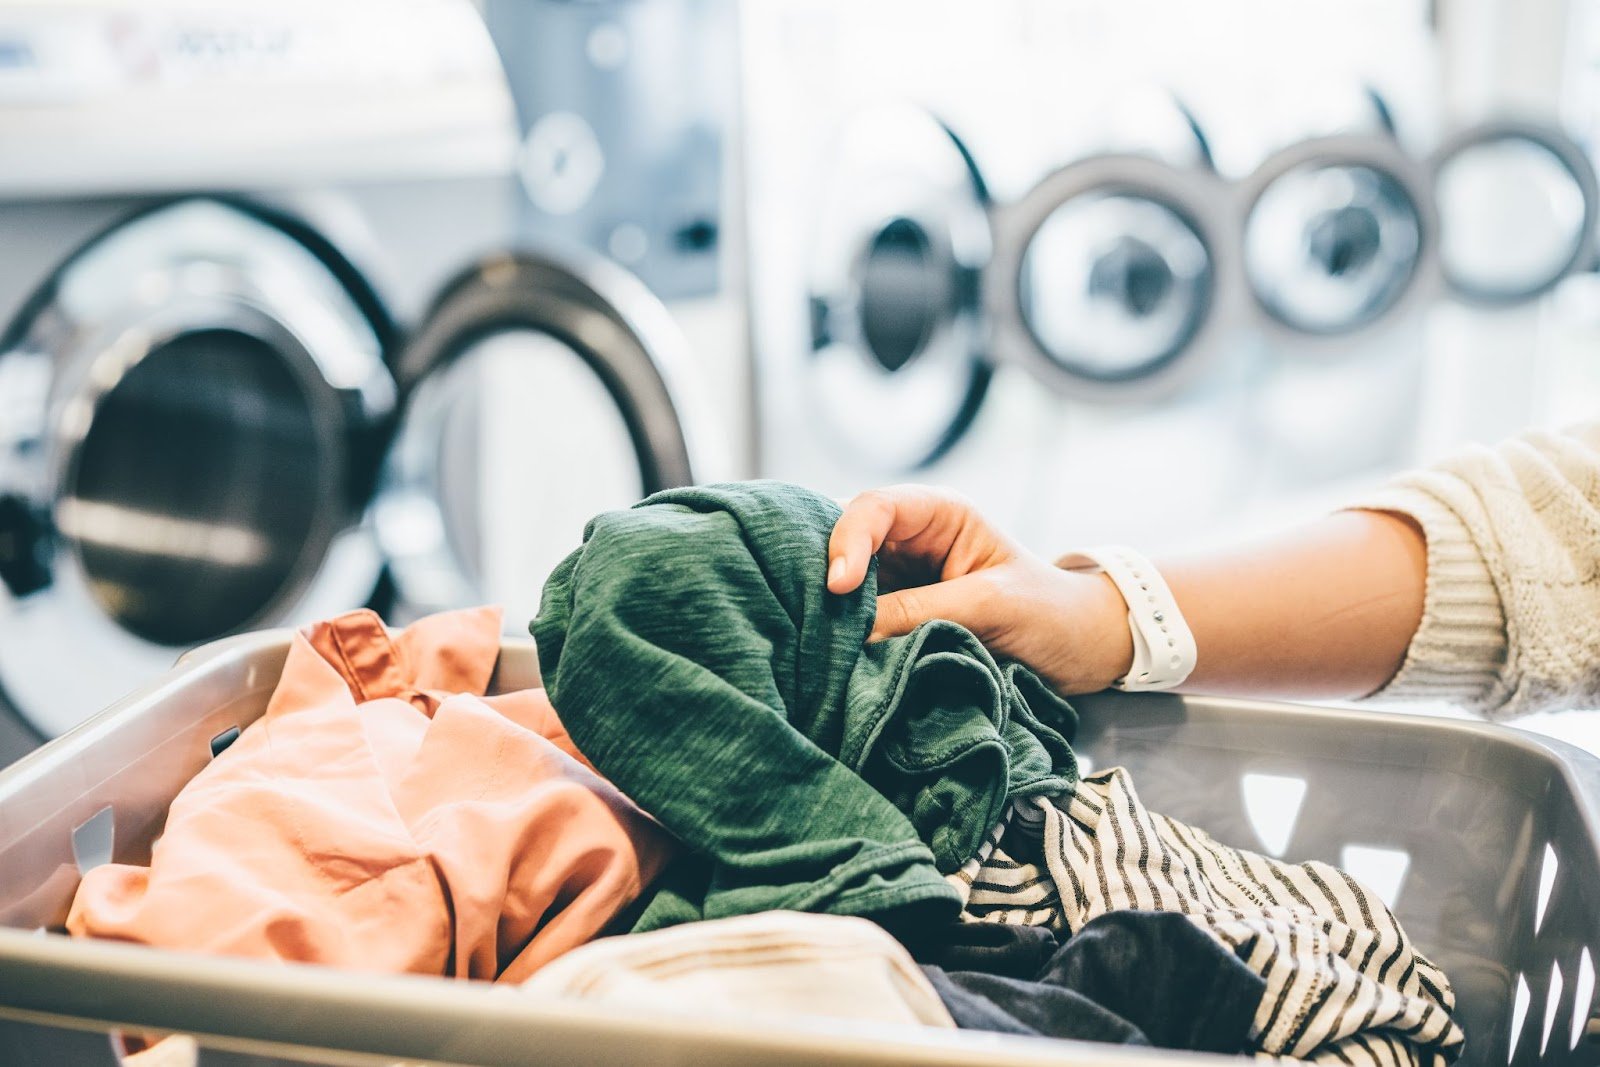 You are currently viewing 3 Tips to Maximize Profit in the Laundromat Industry